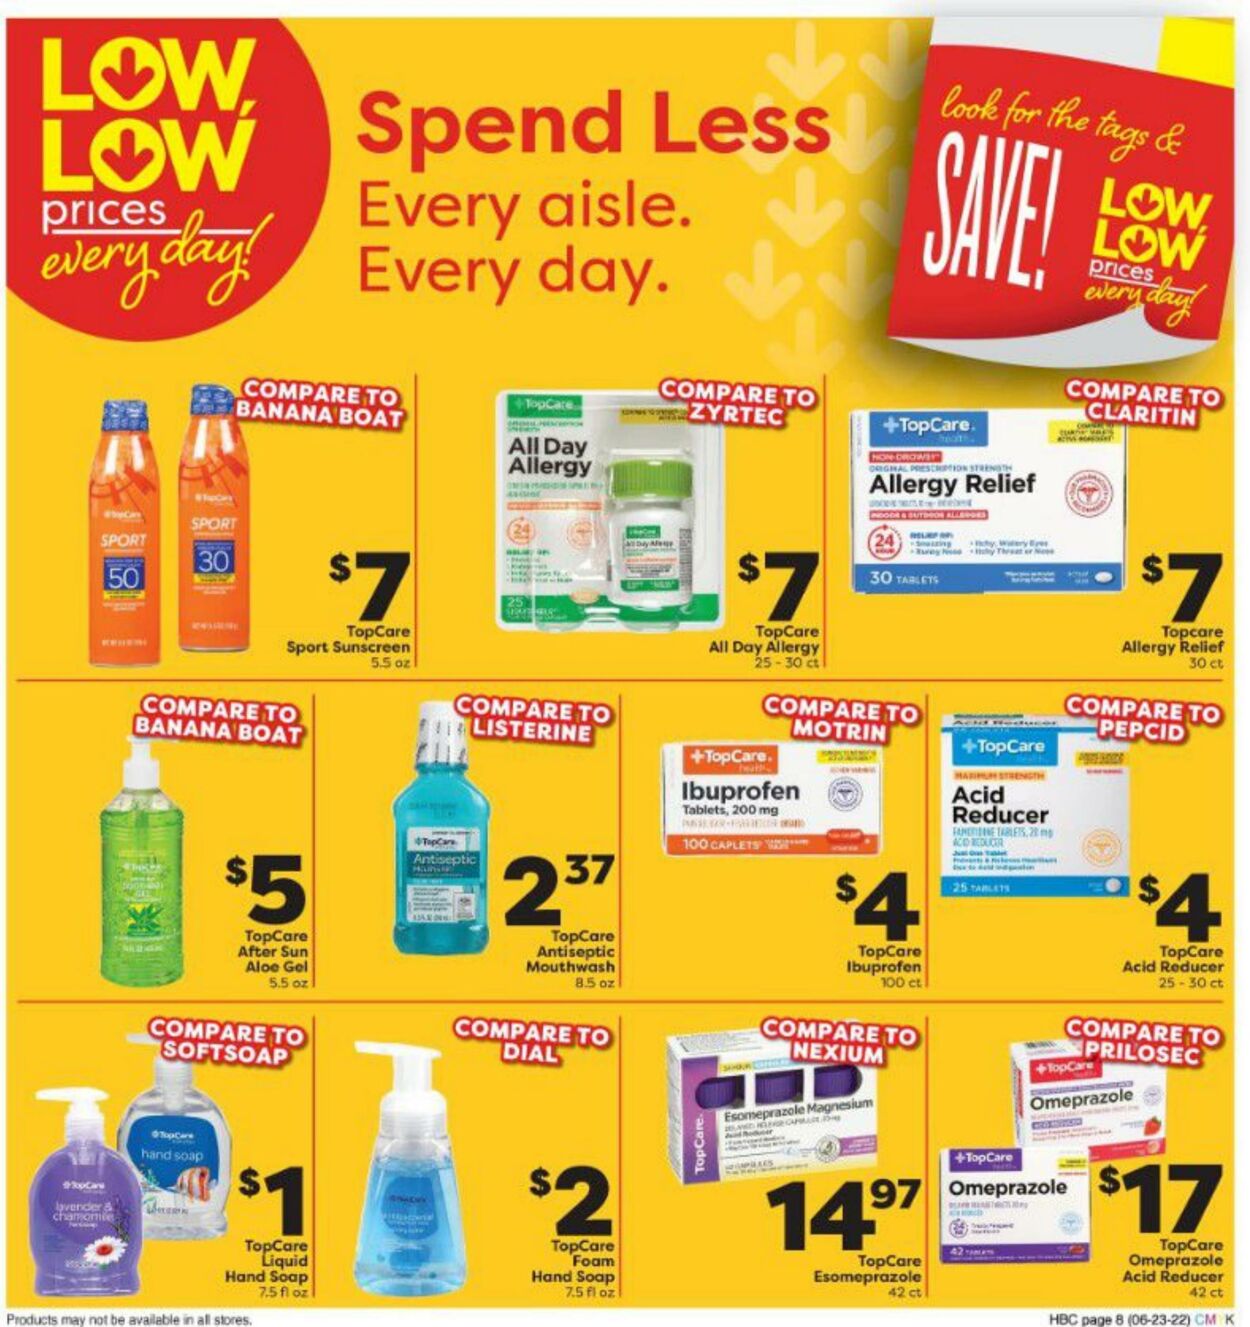 Weekly ad Weis 06/23/2022 - 07/27/2022